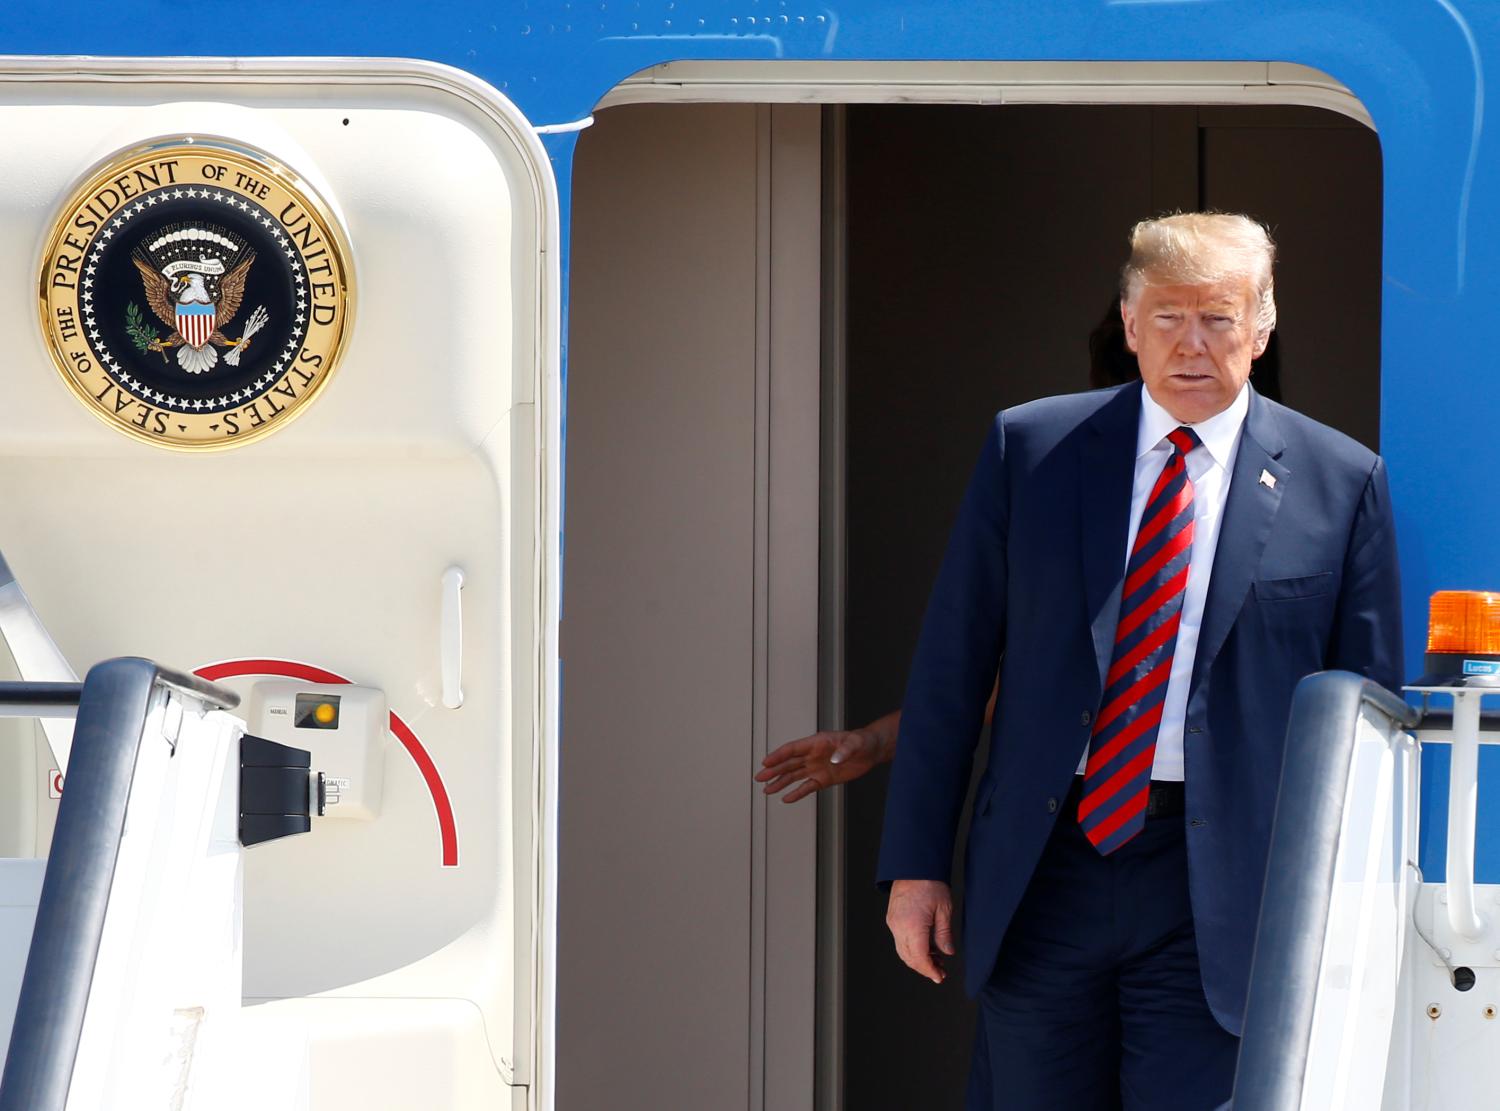 U.S. President Donald Trump and First Lady Melania Trump arrive aboard Air Force One, for their first official visit to Britain, at Stansted Airport, Britain, July 12, 2018. REUTERS/Henry Nicholls - RC1138DA3BE0